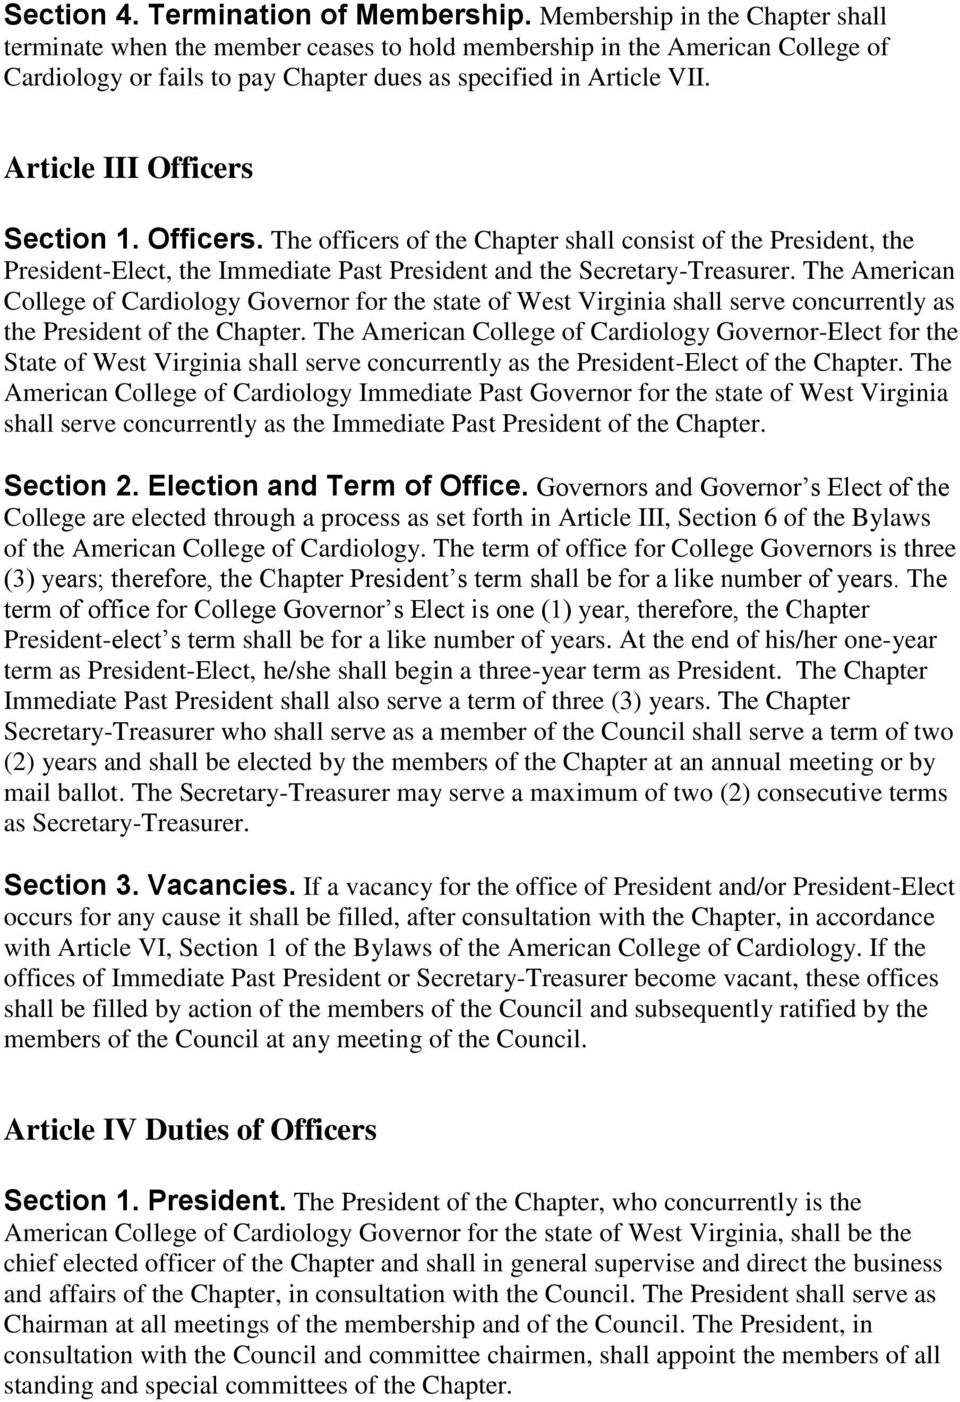 Article III Officers Section 1. Officers. The officers of the Chapter shall consist of the President, the President-Elect, the Immediate Past President and the Secretary-Treasurer.